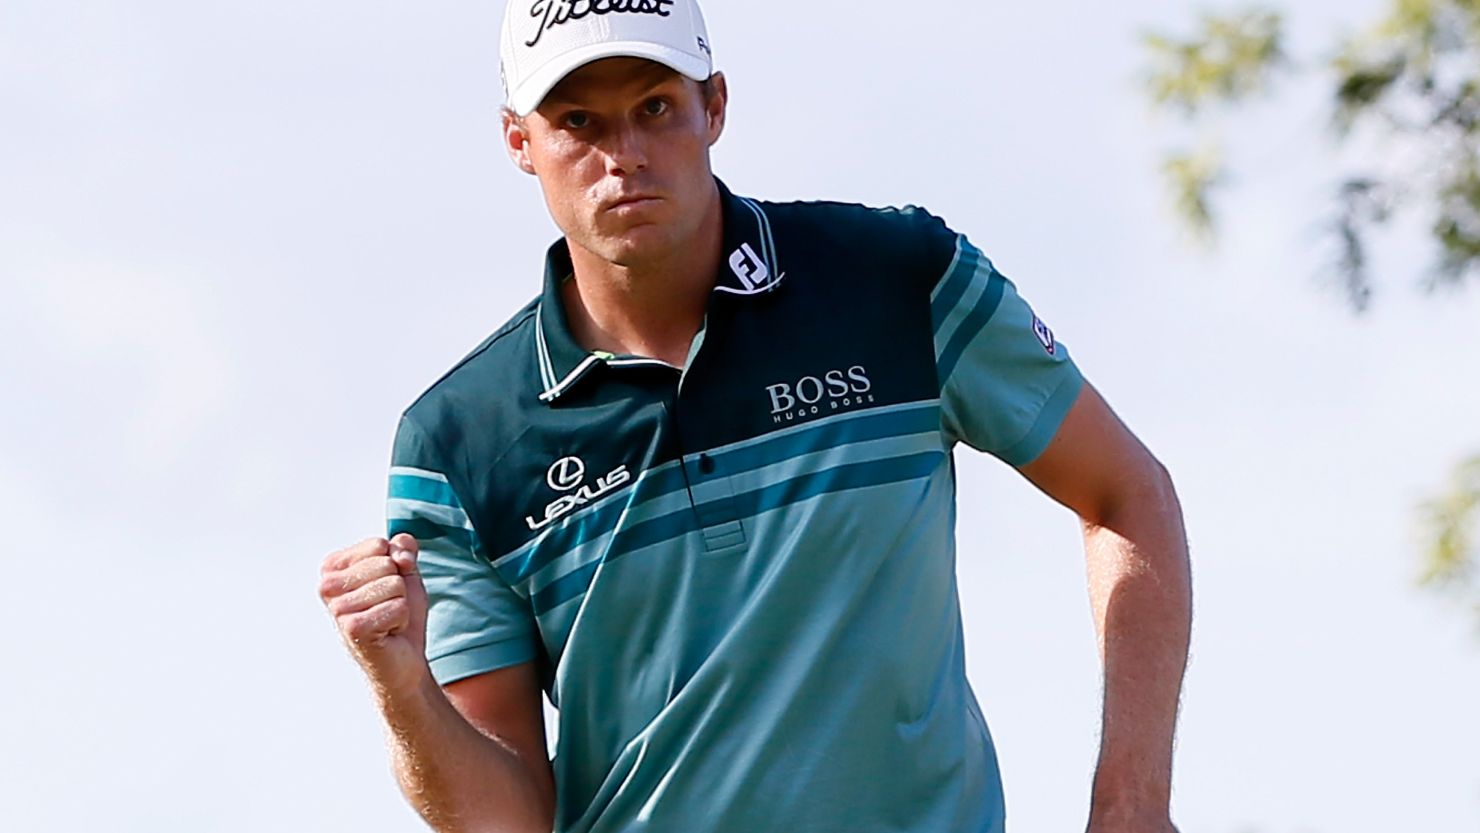 A pumped up Nick Watney secured a three shot win in The Barclays tournament at Bethpage GC.